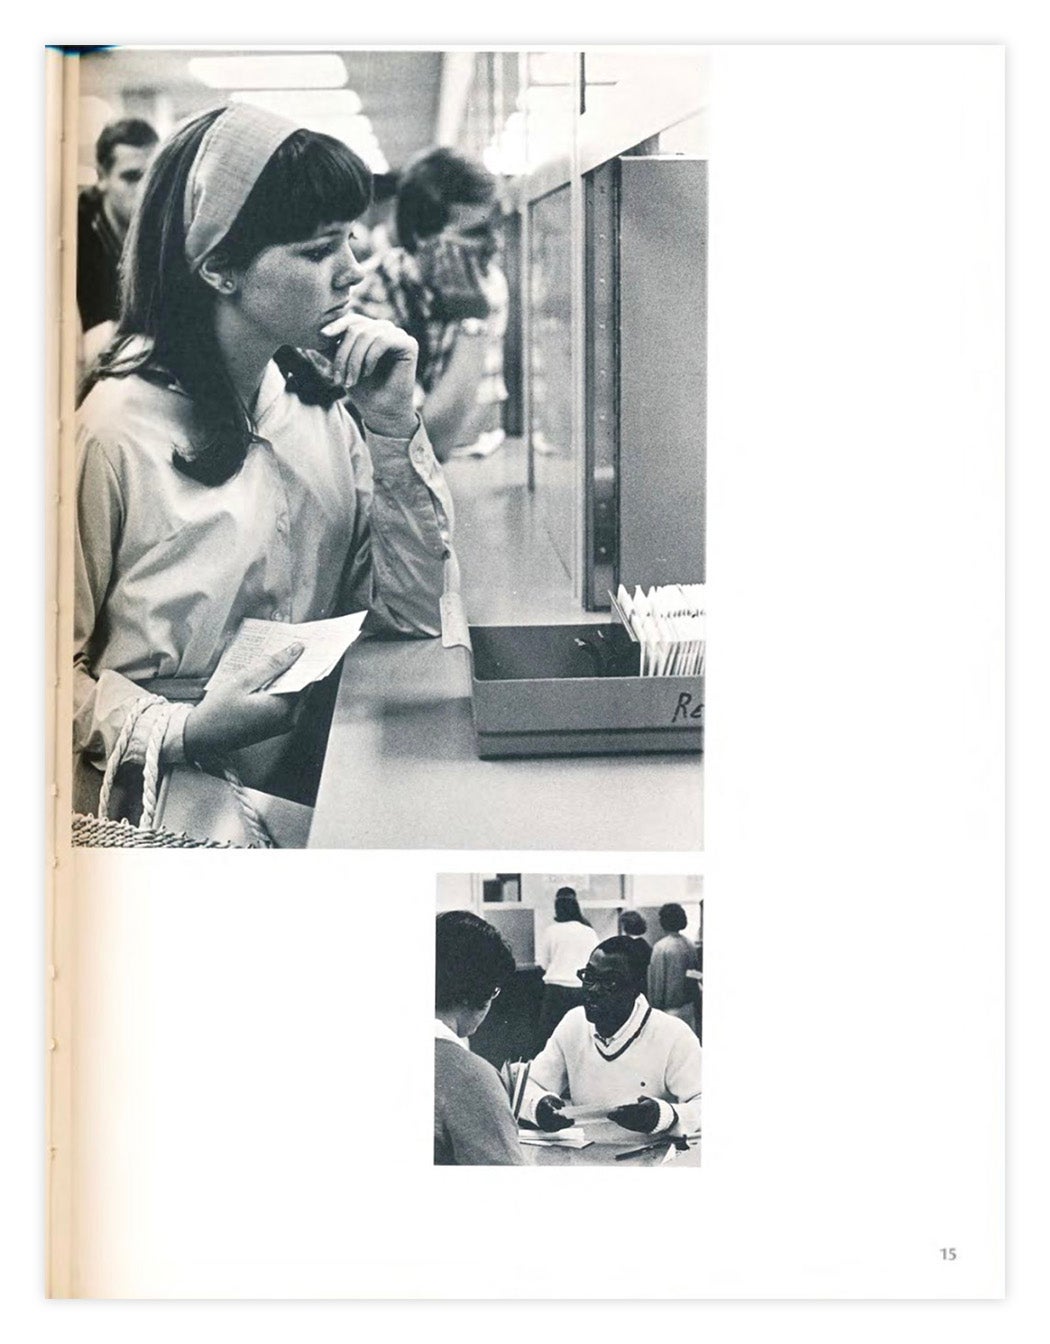 A yearbook page with two images on it. The larger image, above, is of a young woman looking at the screen of a microfilm viewer. The smaller image is of a man speaking at a table in a library. 